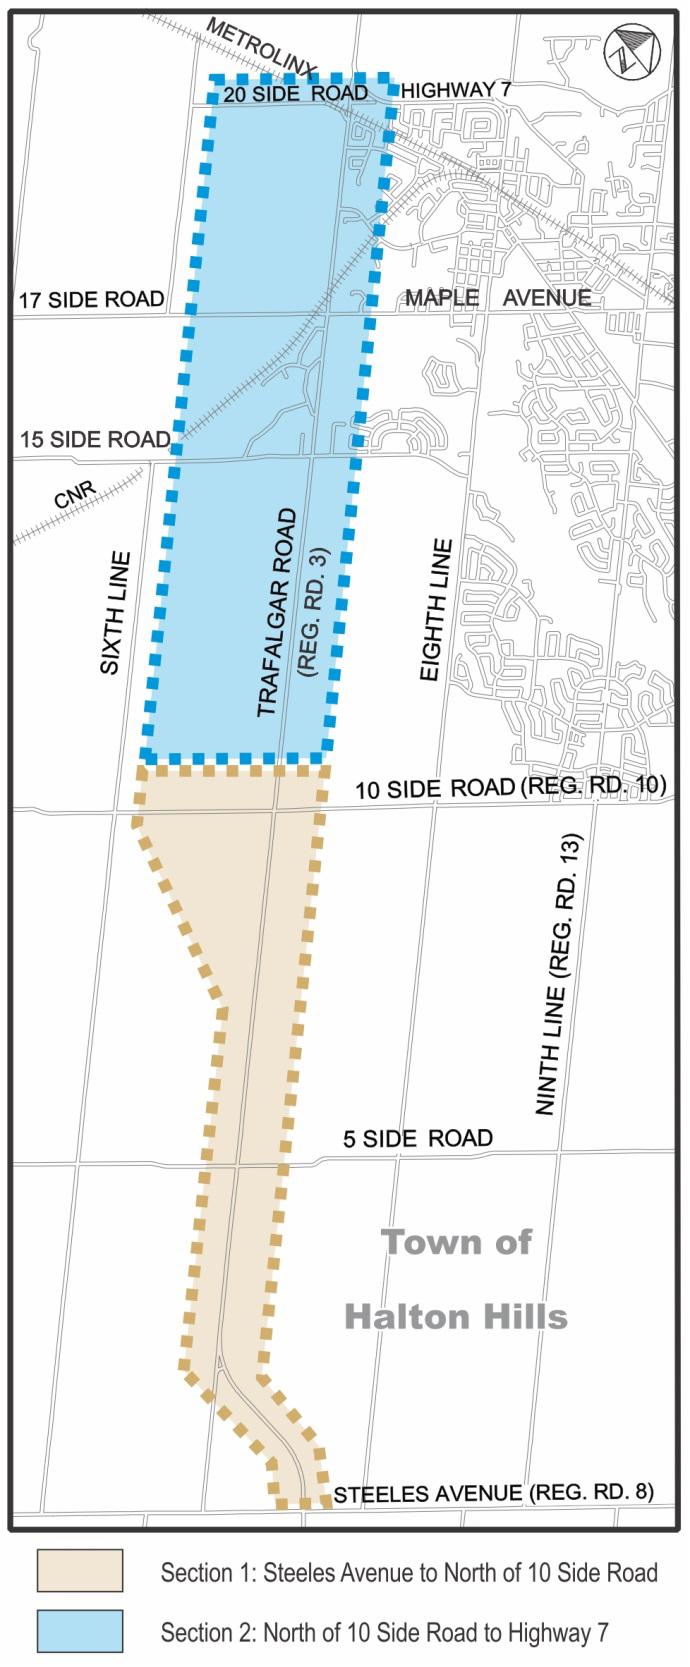 Chapter 1 - Introduction Section 1: Steeles Avenue to North of 10 Side Road (the subject of this report) Section 2: North of 10 Side